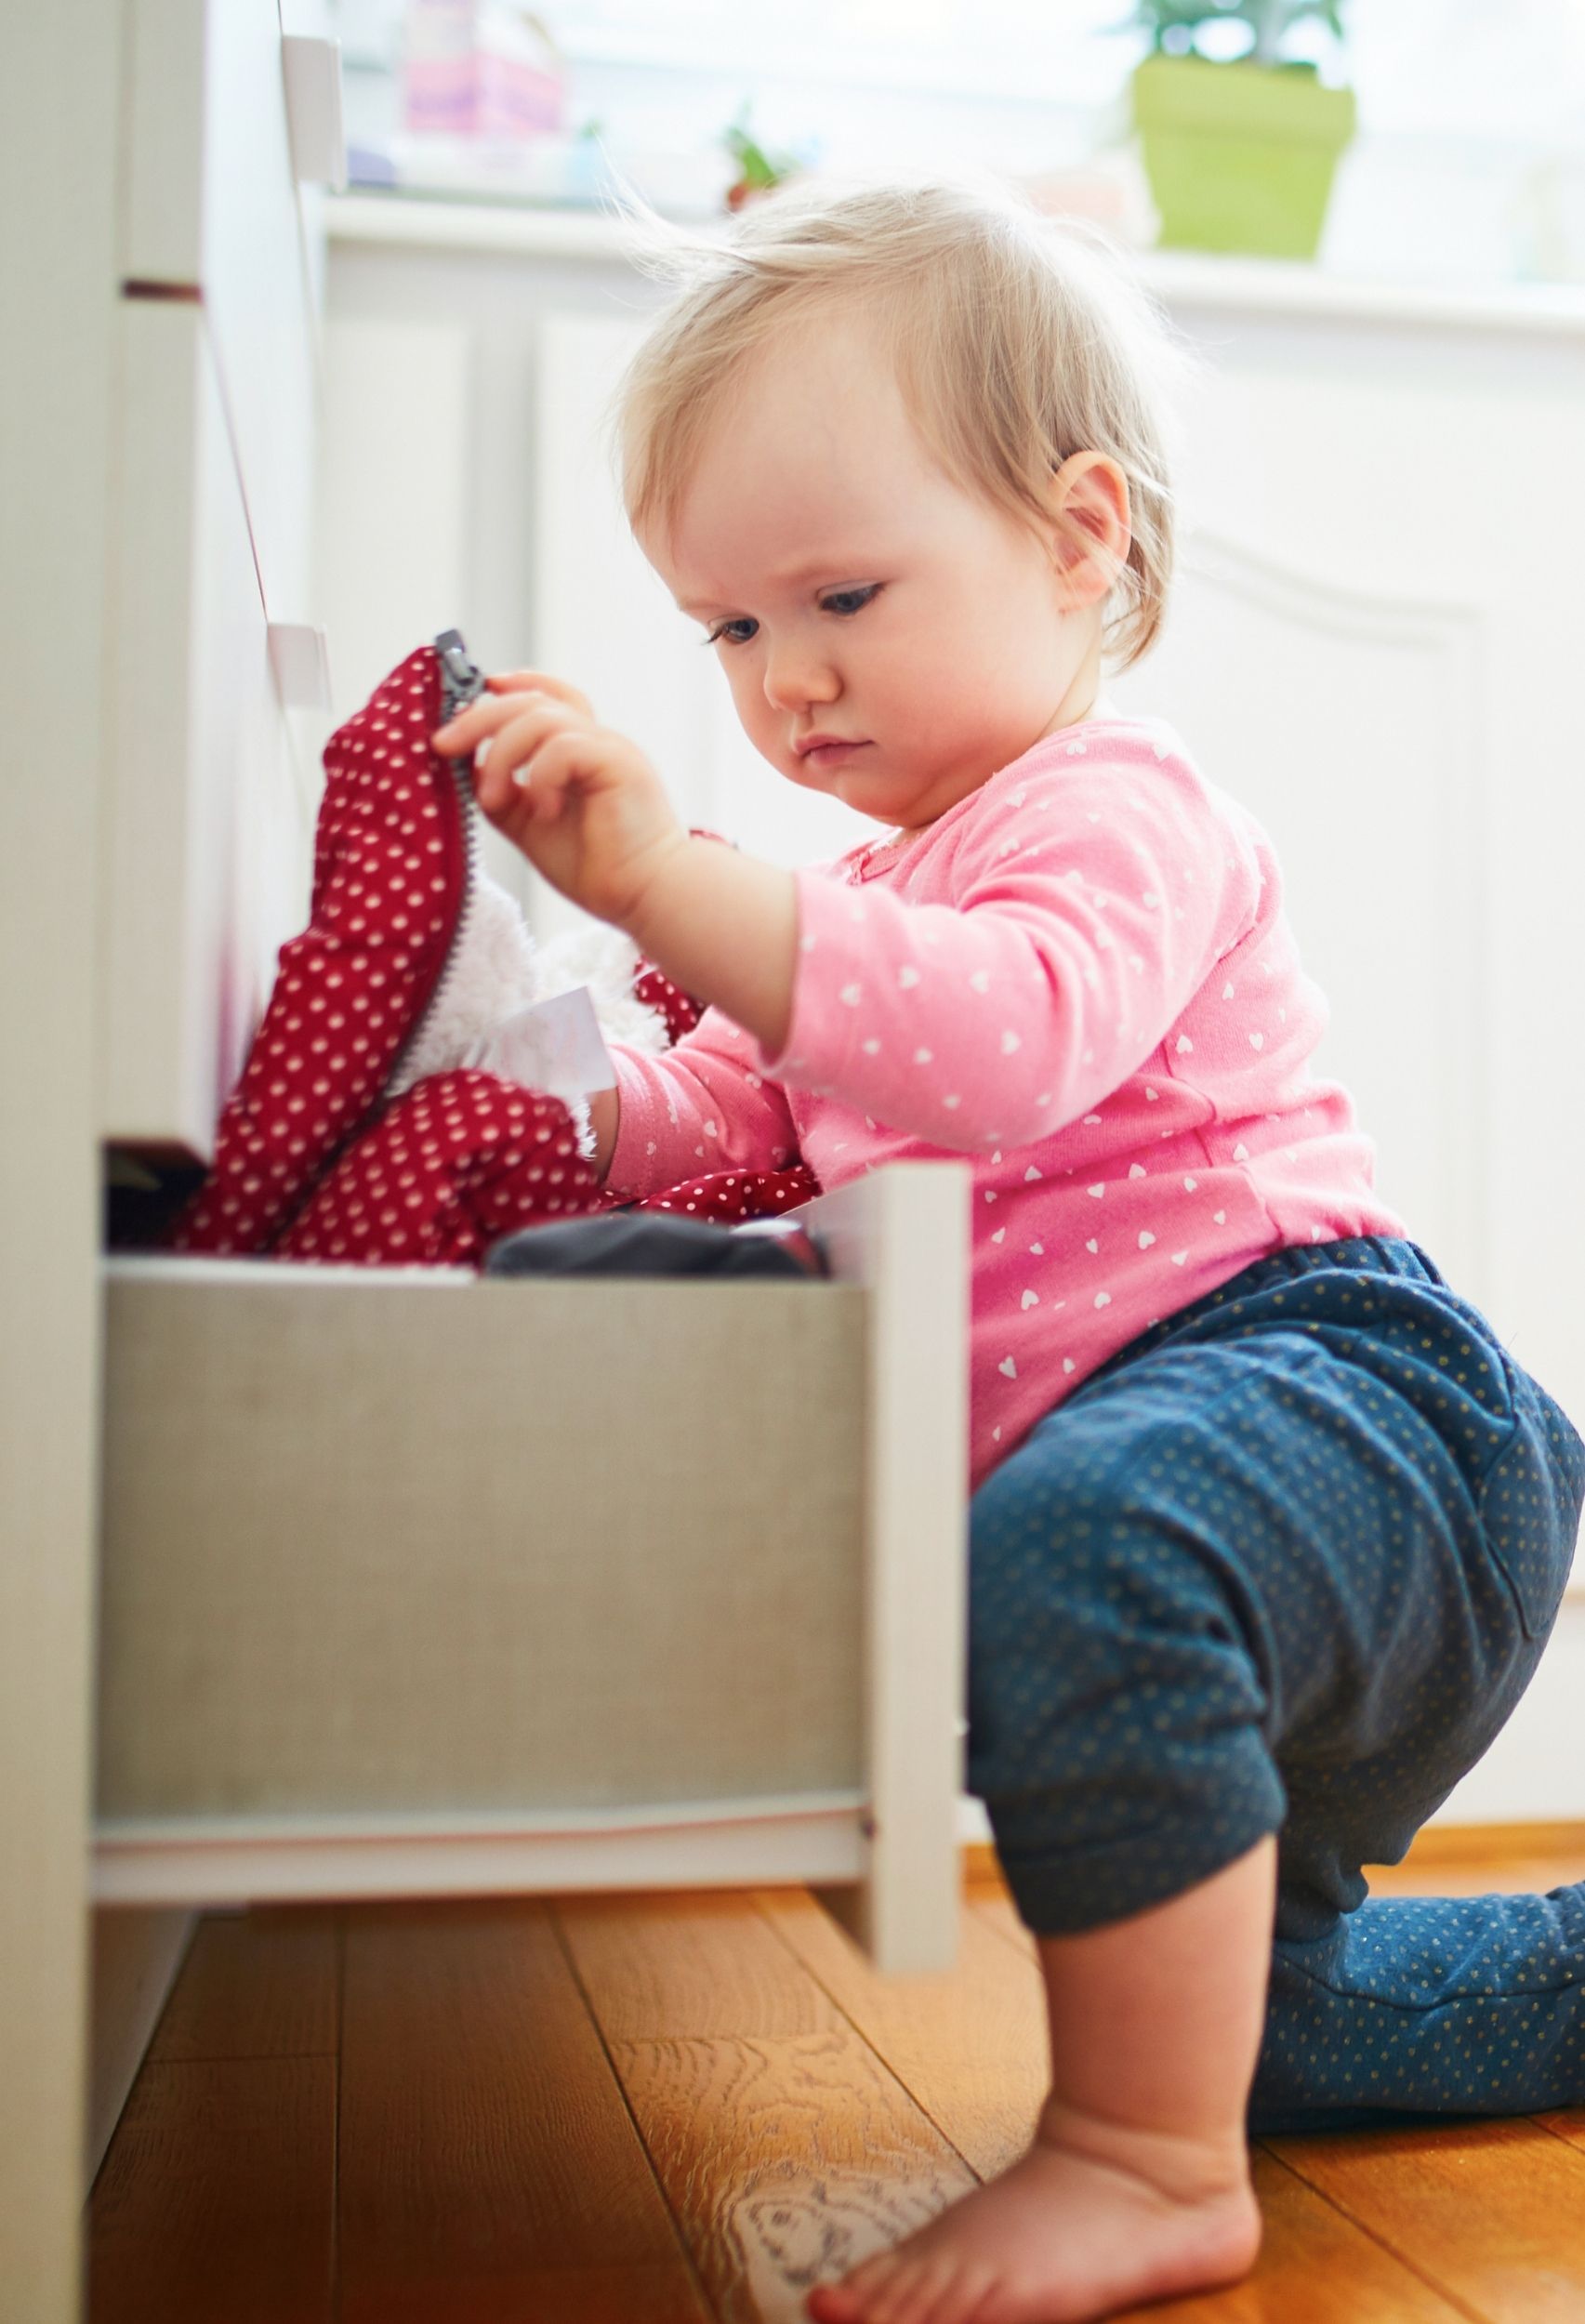 The First Timers Guide To Babyproofing At Home -Rita Reviews